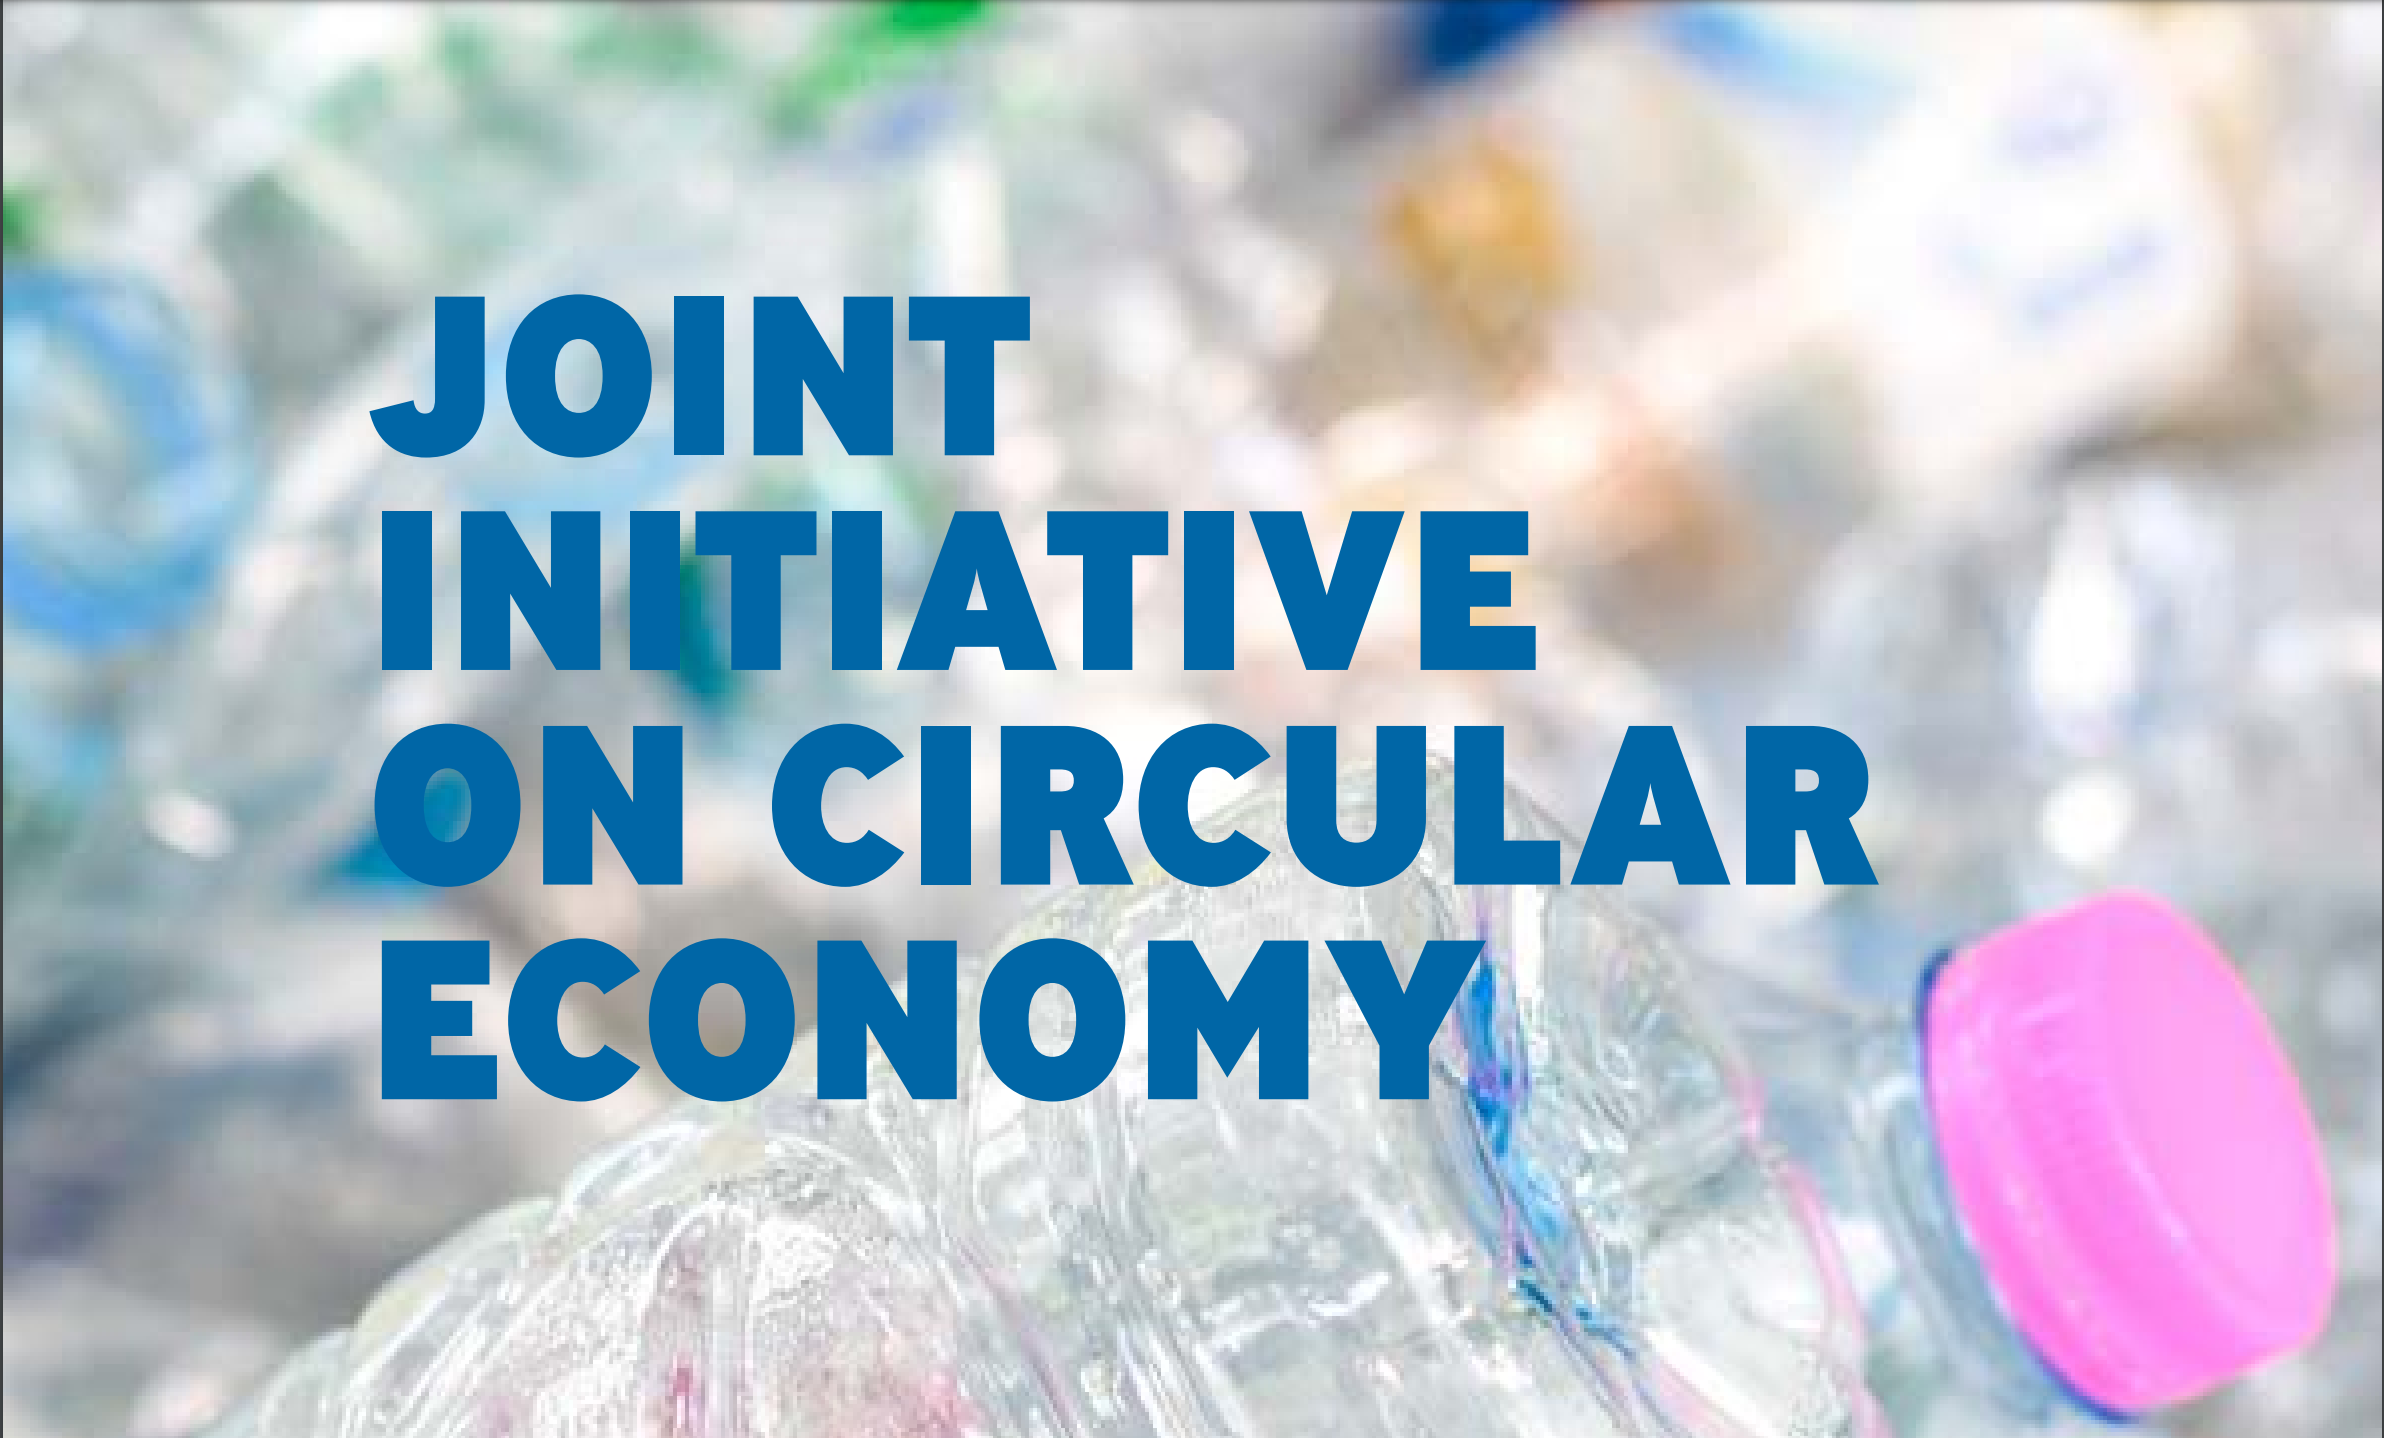 Joint Initiative on Circular Economy